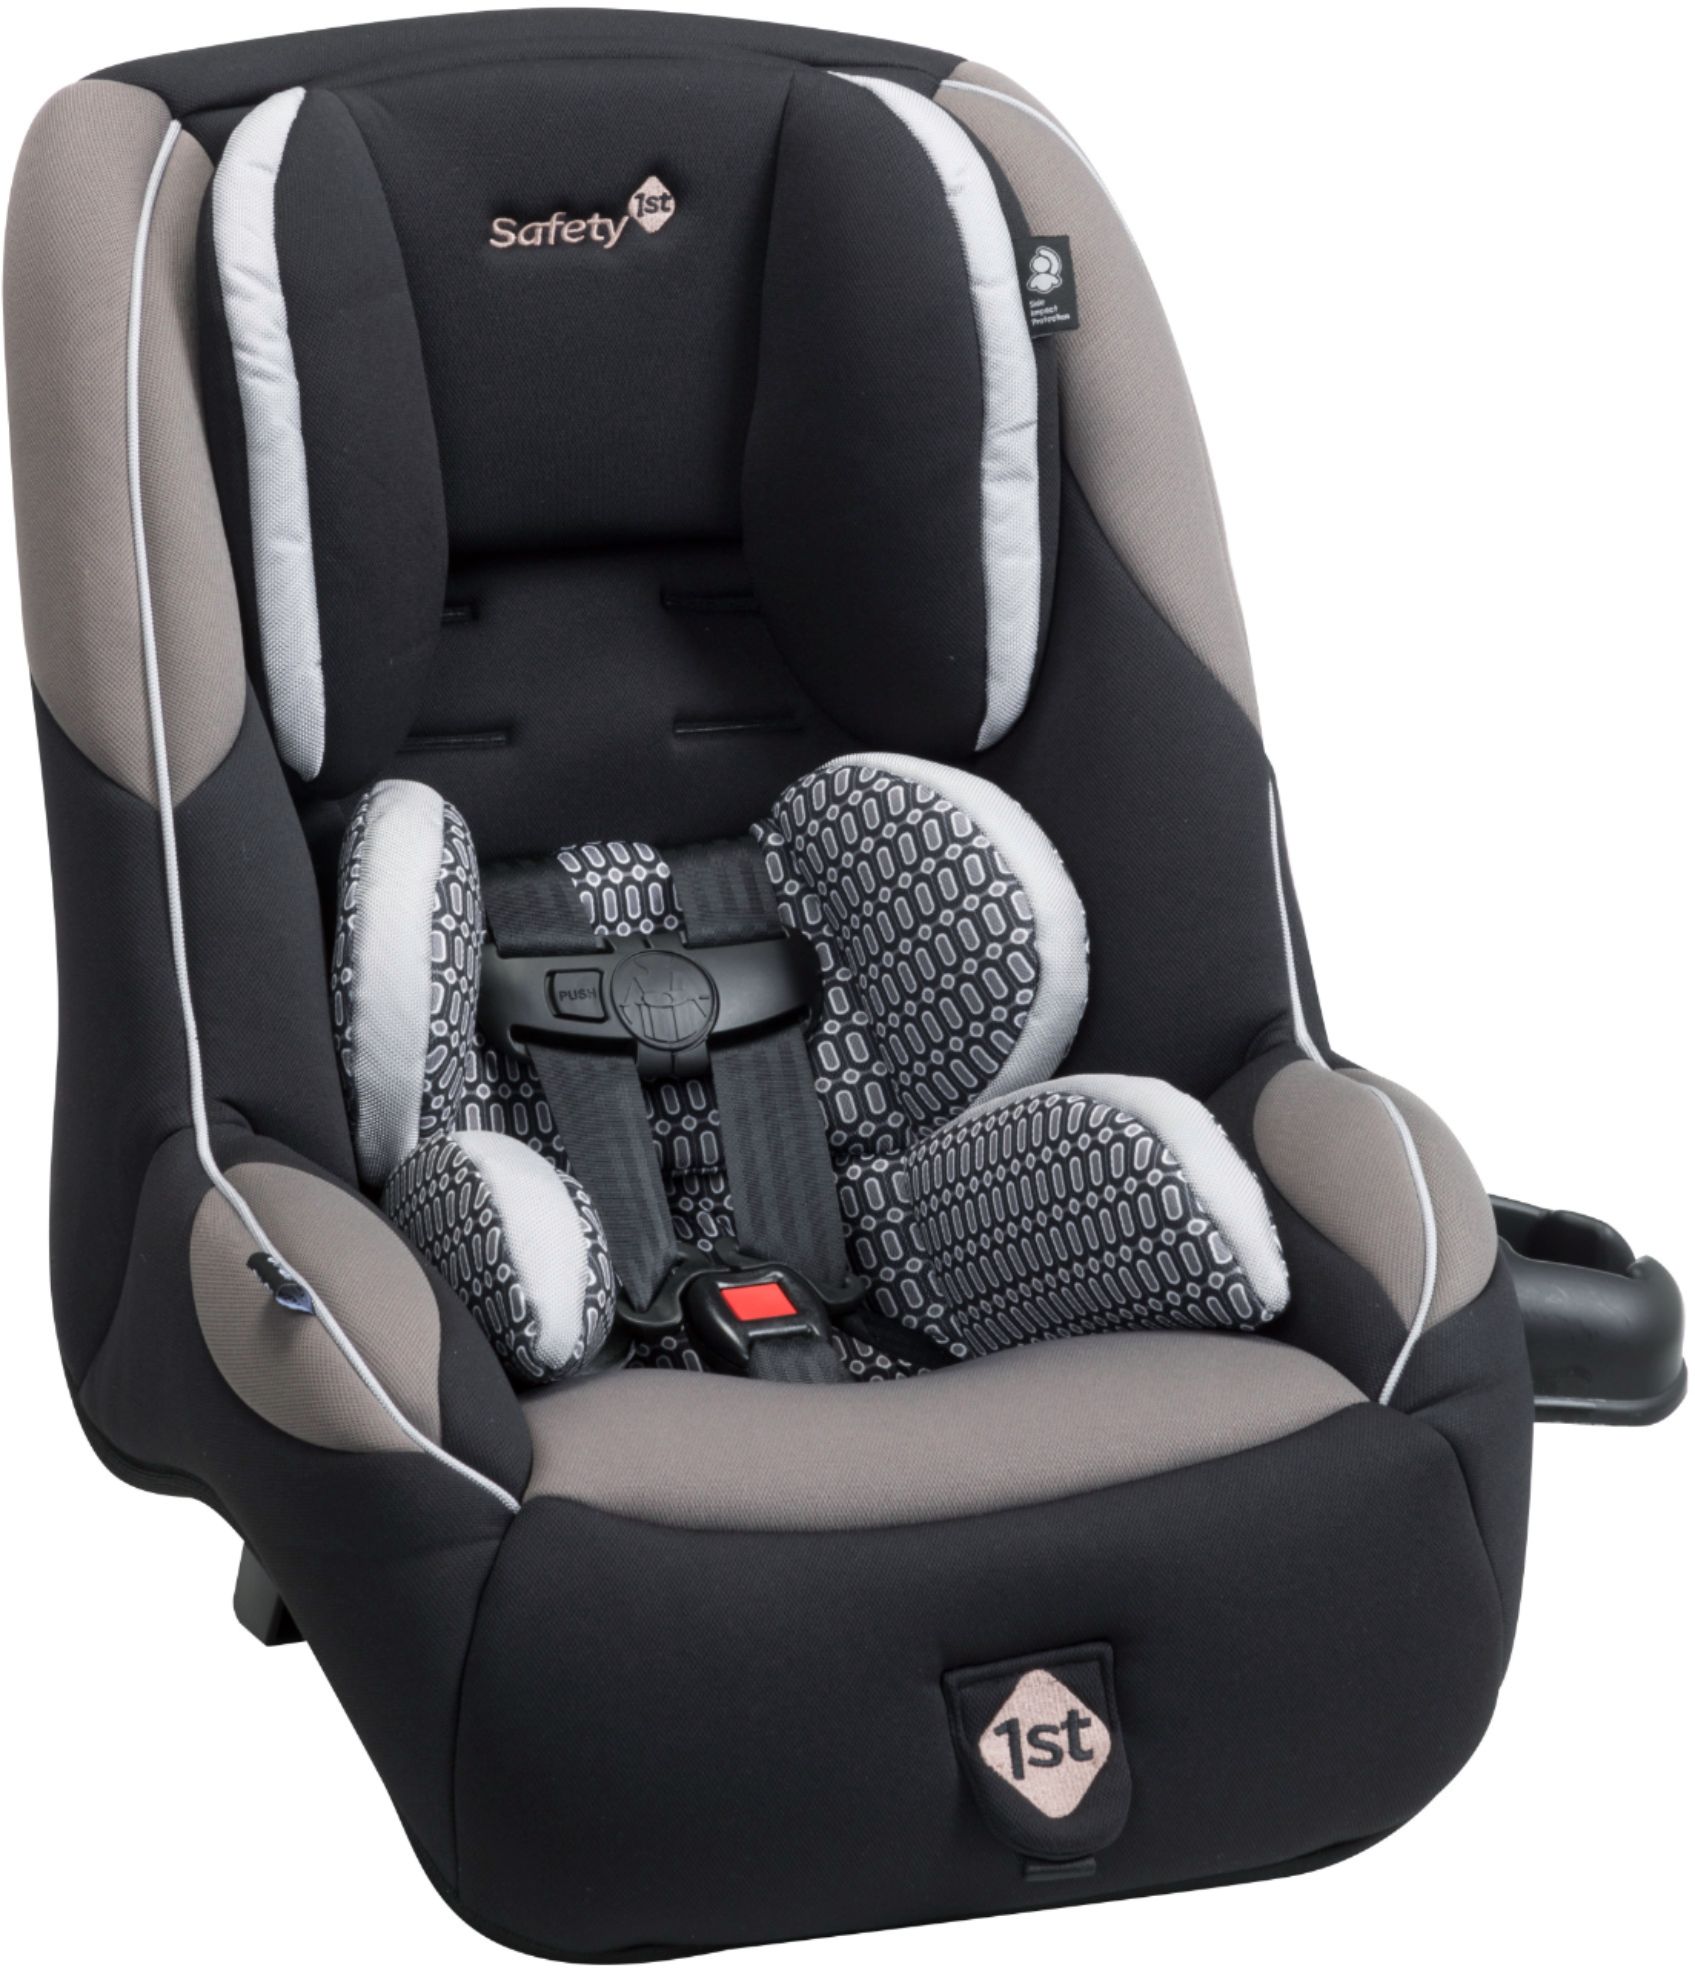 Angle View: Safety 1st - Grow and Go™ All-in-One Convertible Car Seat - Grey